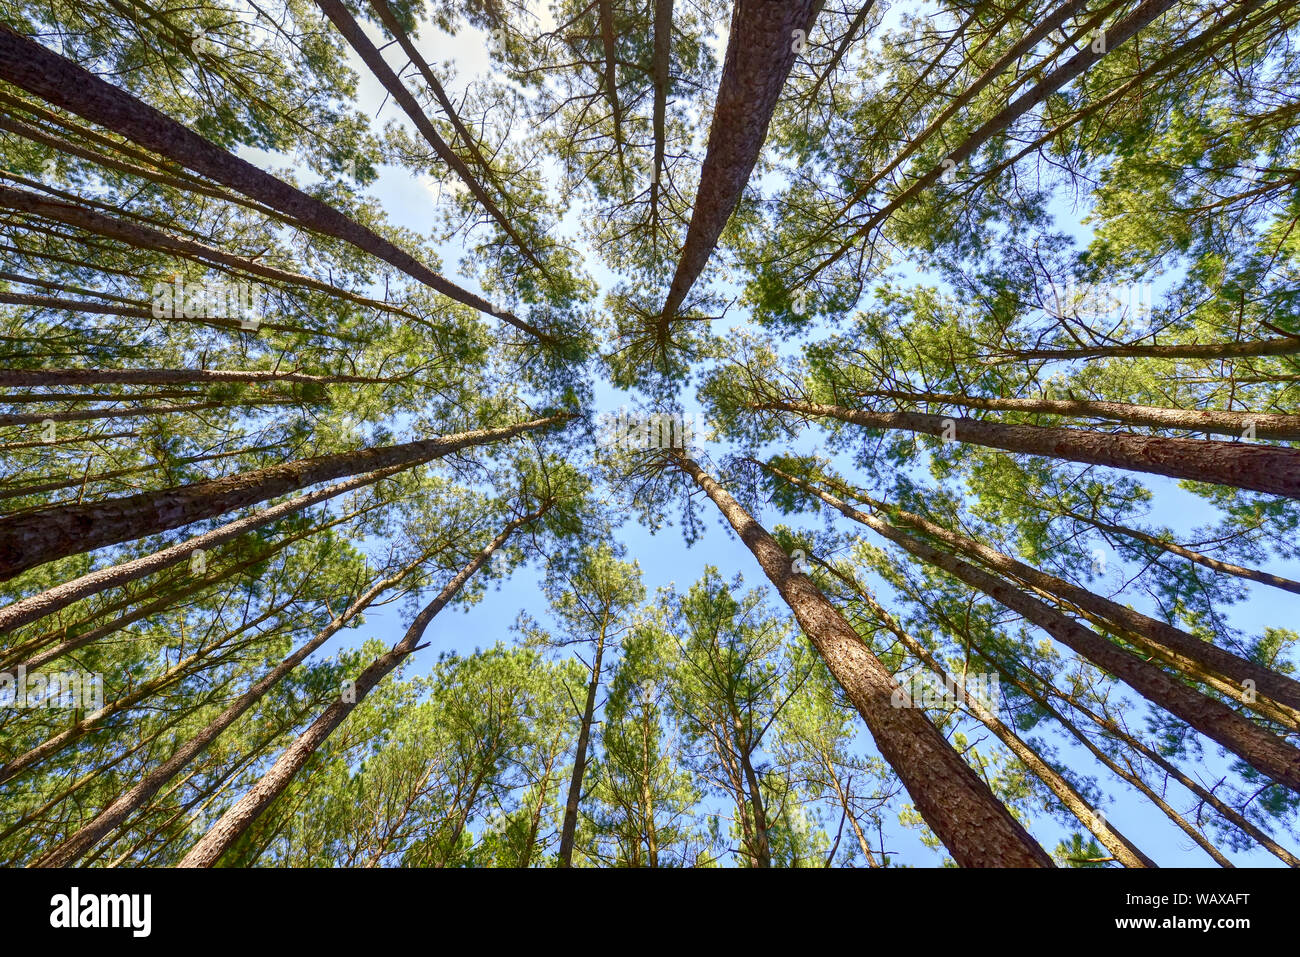 View of pine trees from below creating a circular fan shape pattern against the blue sky background above. Stock Photo